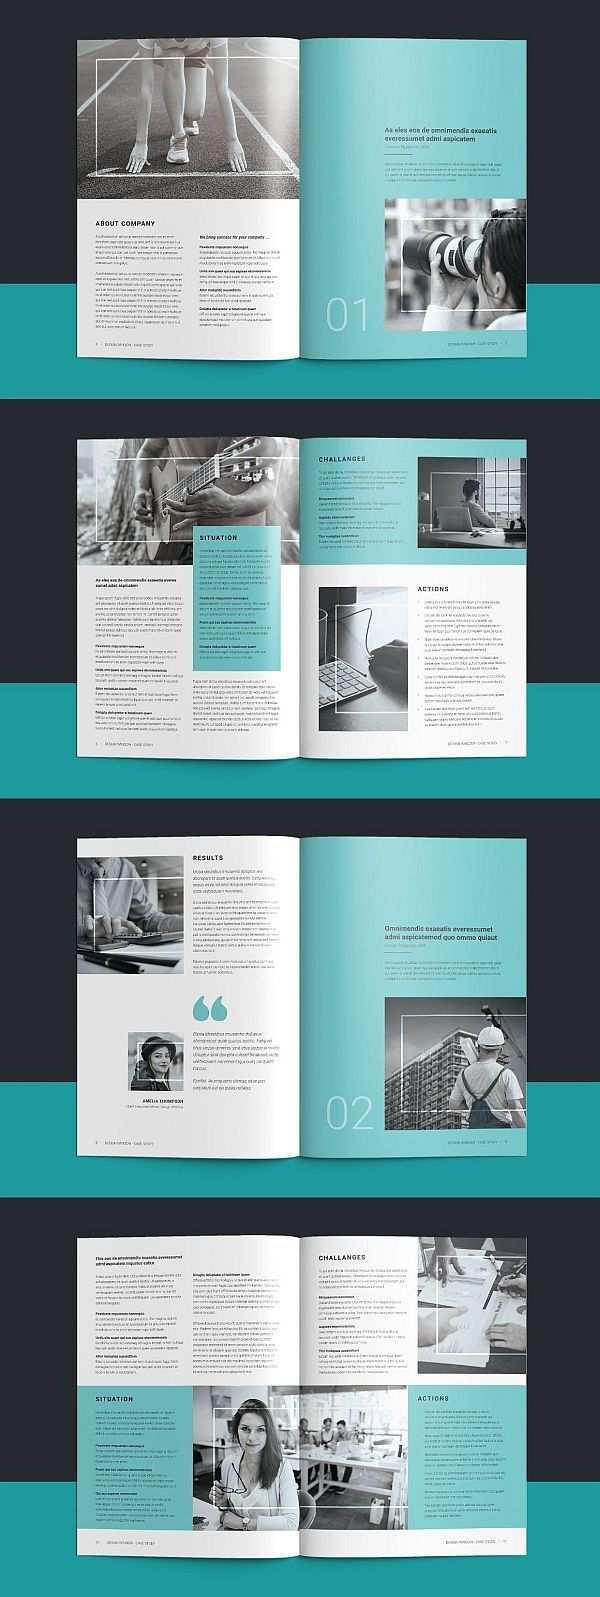 Case Study Booklet Booklet Design Booklet Template Magazine Layout Inspiration